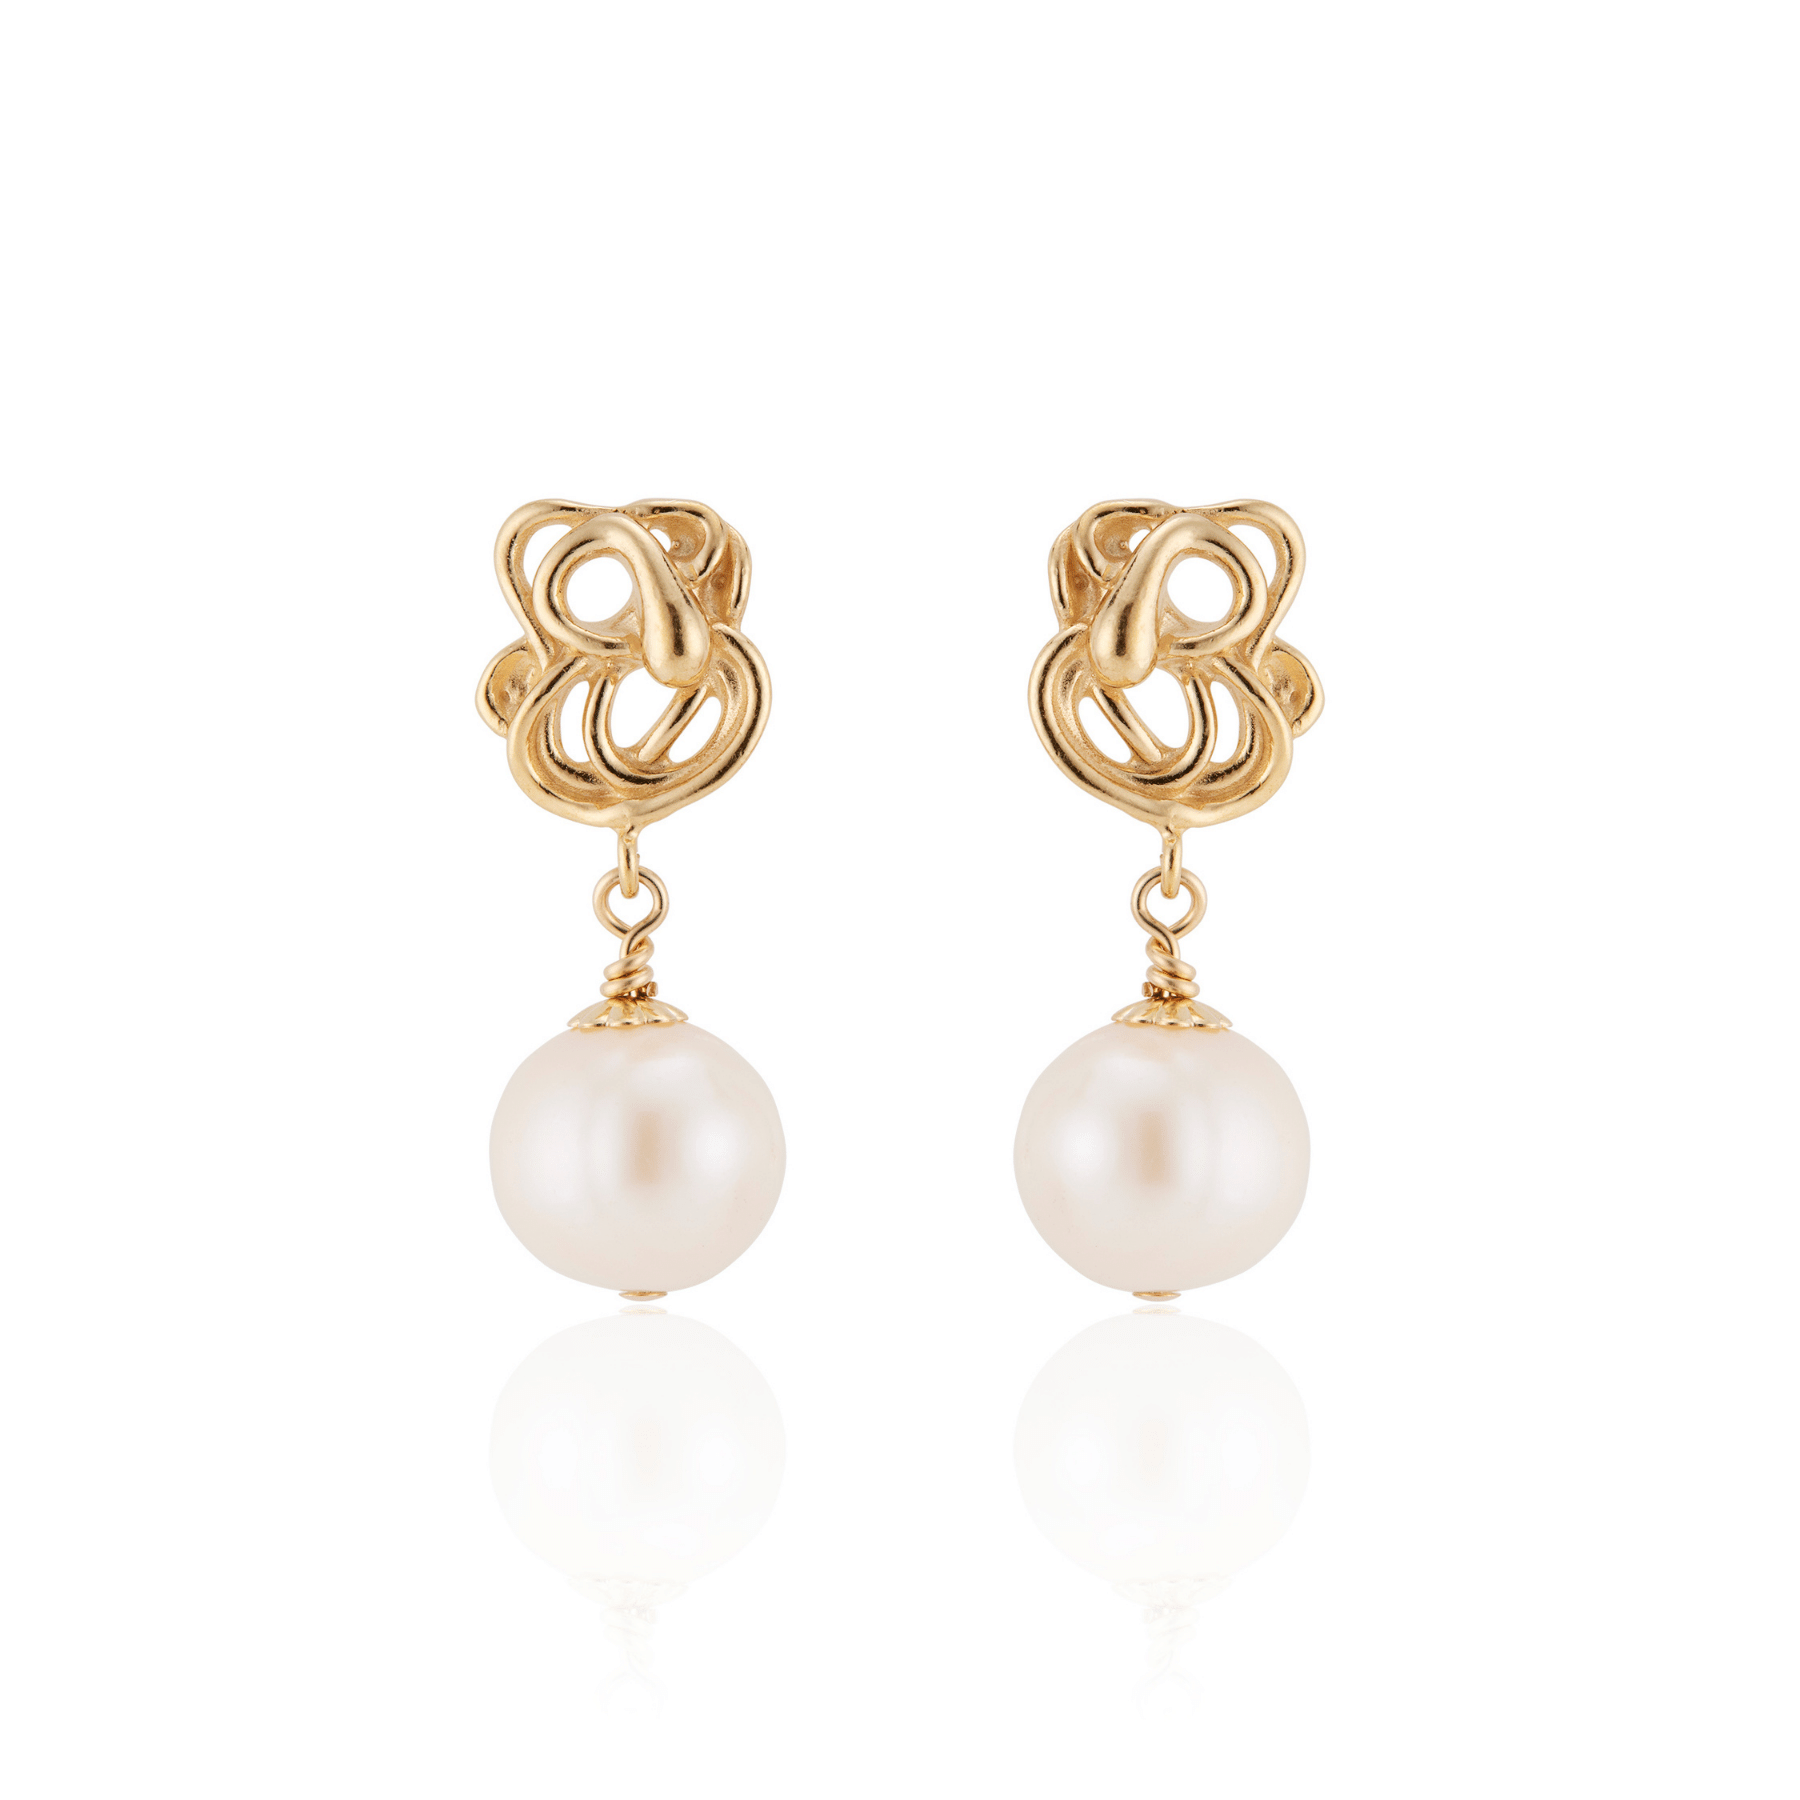 Abstract squiggle drop earrings in 18k gold vermeil with cultured freshwater pearl drops.